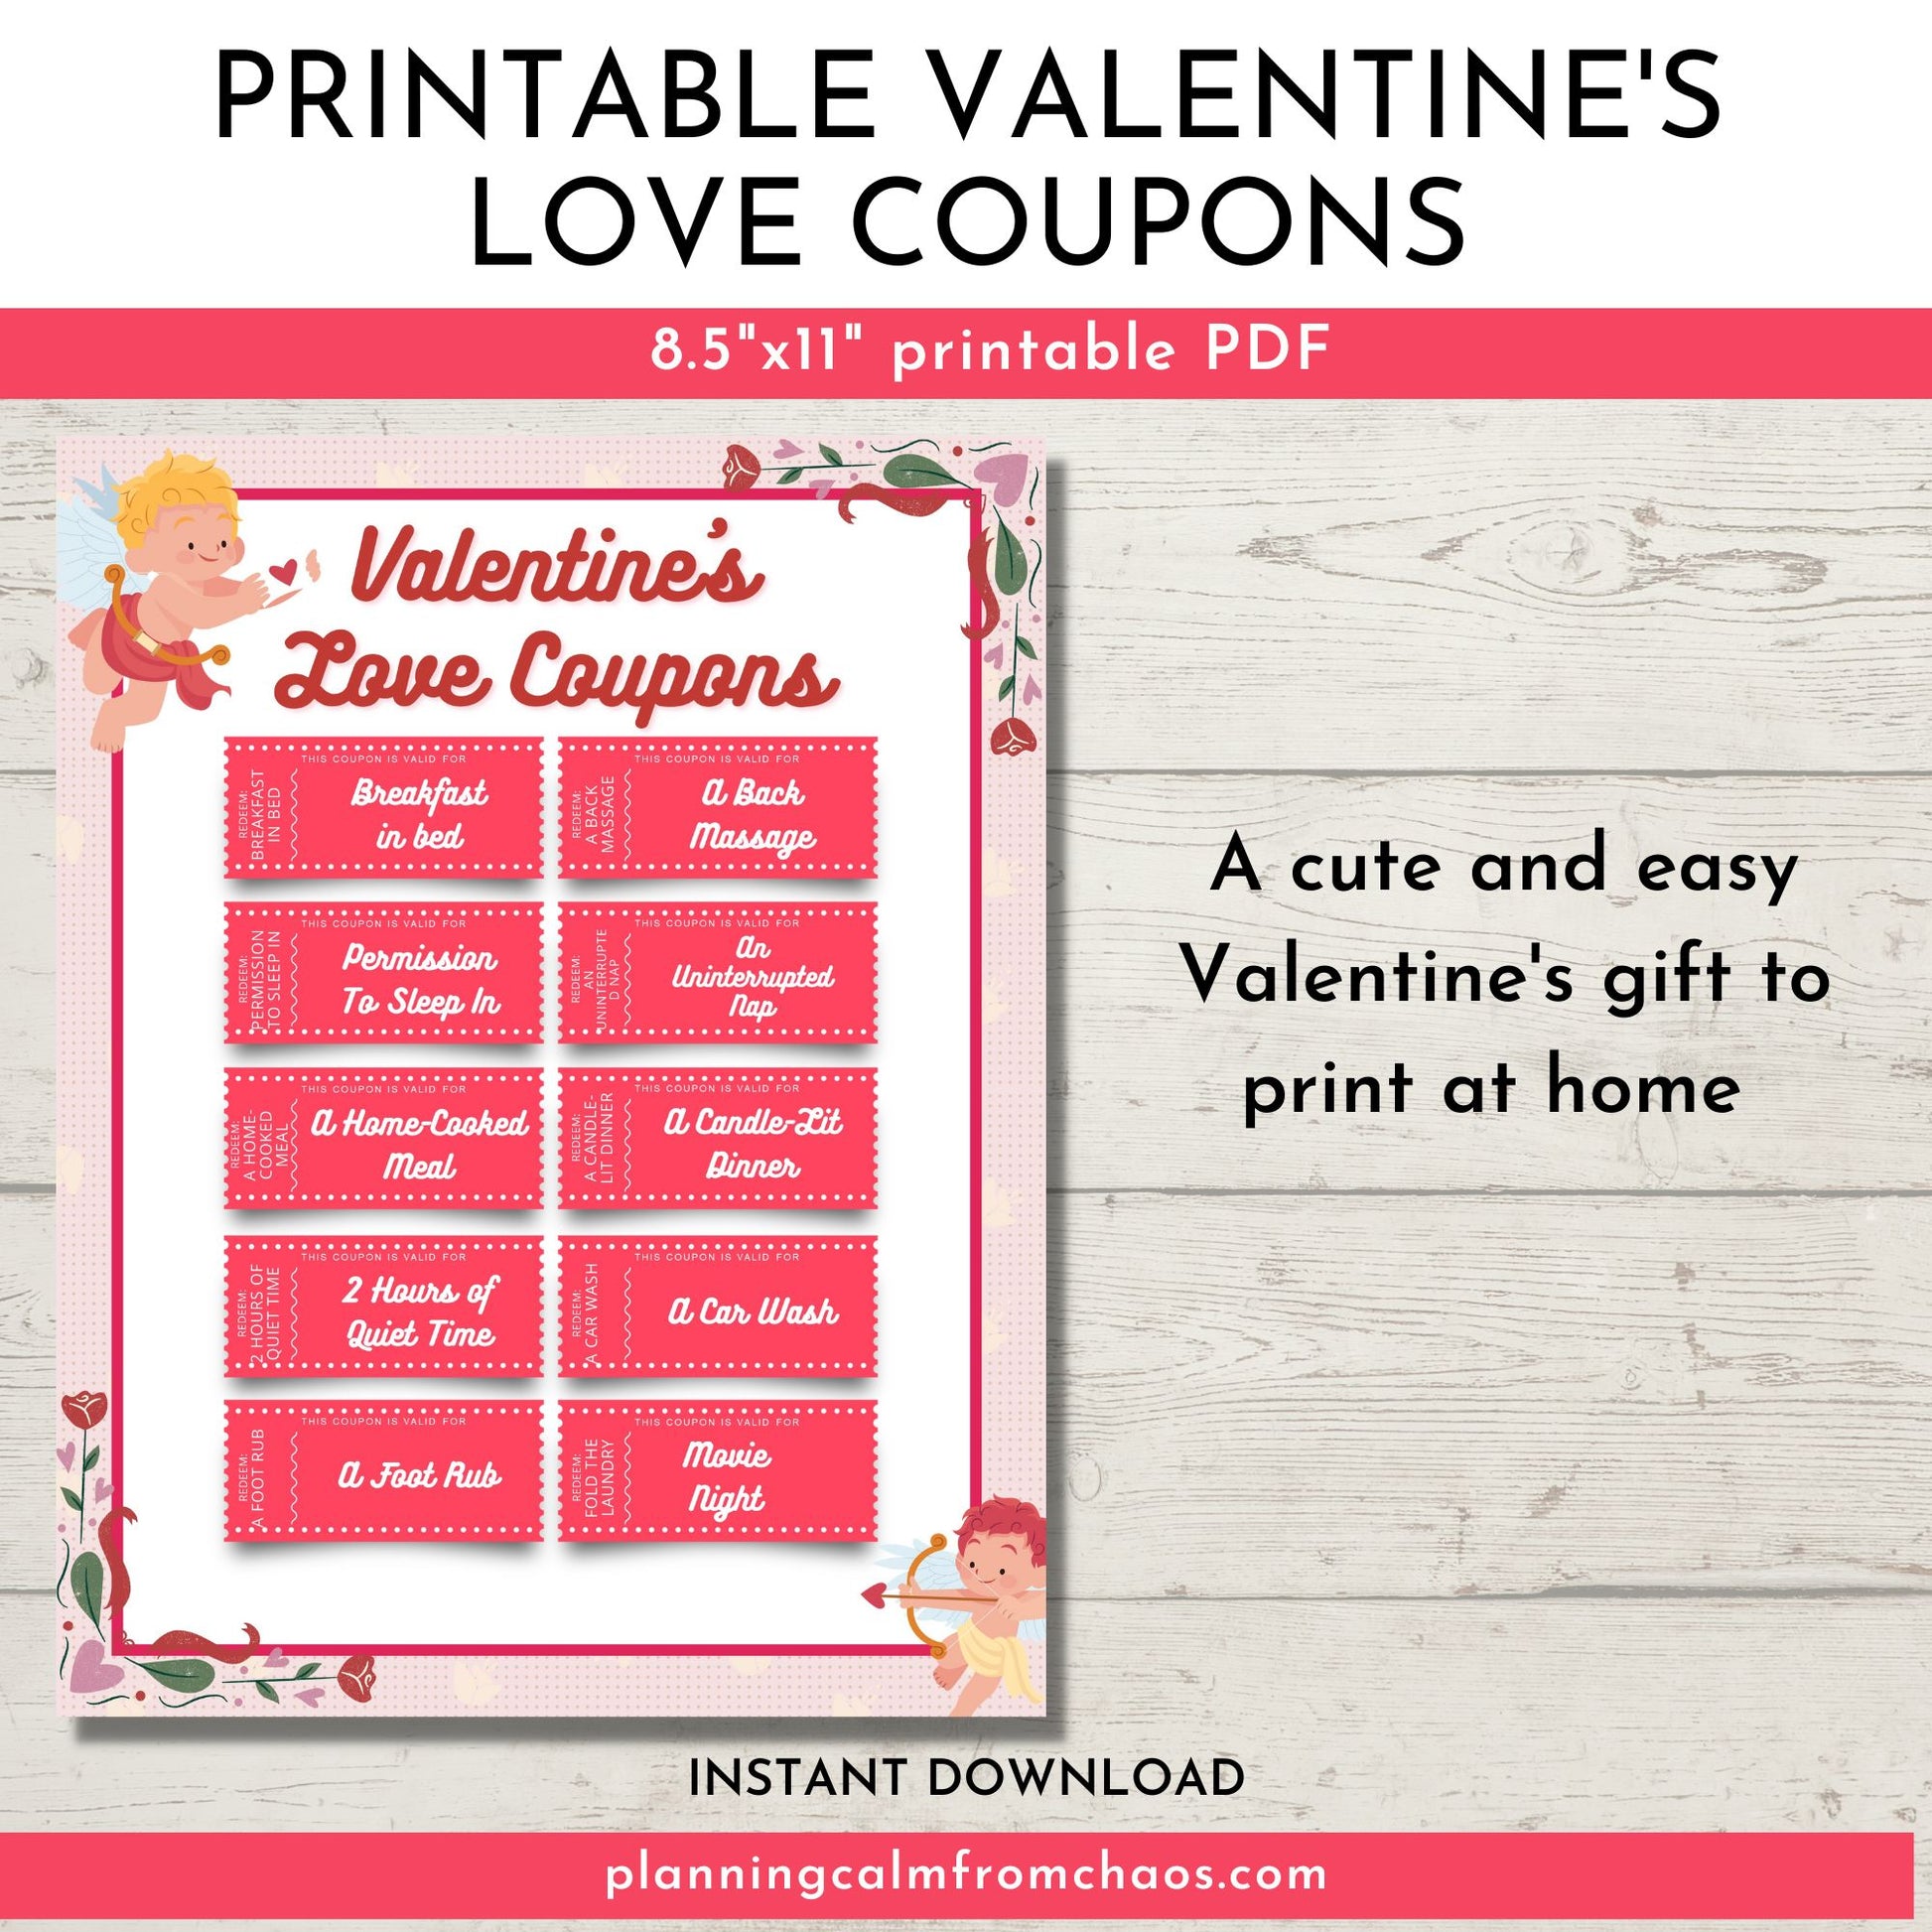 printable valentines love coupons